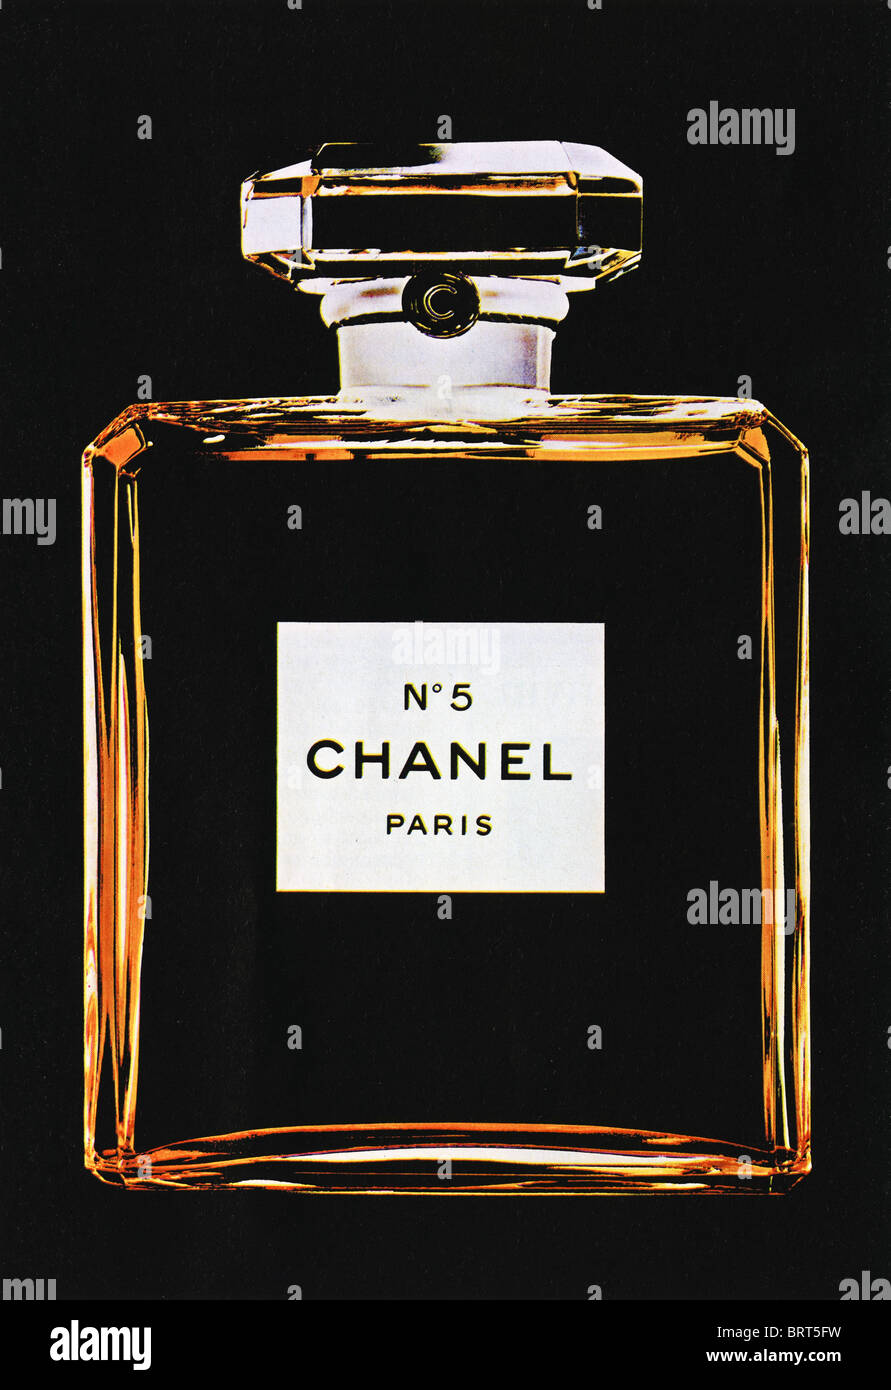 Touching letter from Queen Elizabeth II reveals her love of Chanel No. 5  perfume